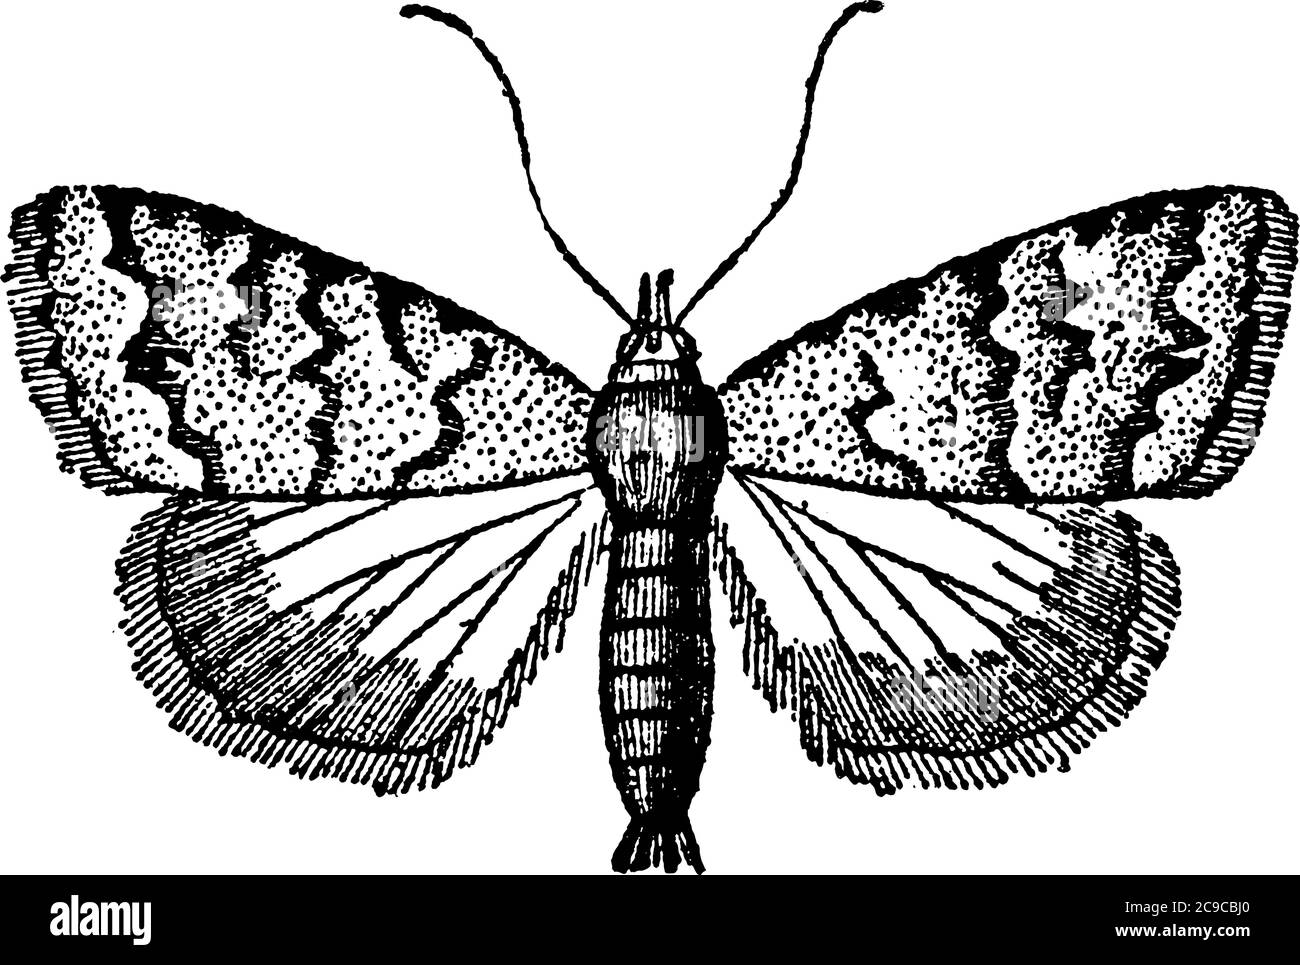 Pyralidina, a small moth with long slender bodies and large forewings with dark regular patterns and radial veins running through their hindwings, vin Stock Vector